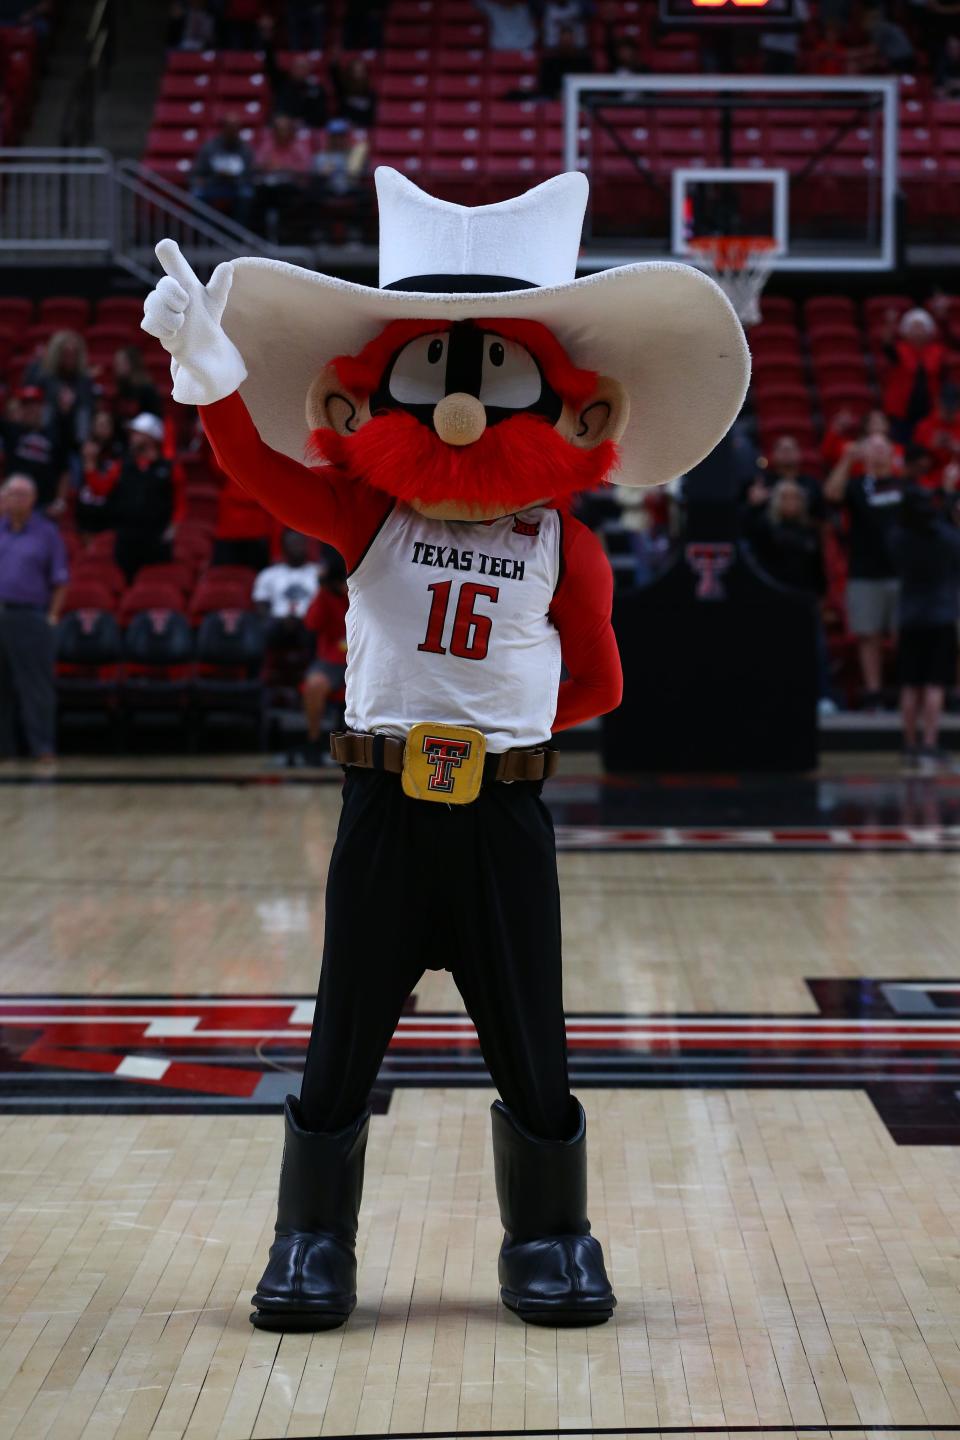 Nov 10, 2022; Lubbock, Texas, USA; The Texas Tech Red Raiders mascot on the court before the game against the Texas Southern Tigers at United Supermarkets Arena. Mandatory Credit: Michael C. Johnson-USA TODAY Sports ORG XMIT: IMAGN-500551 ORIG FILE ID:  20221110_ojr_aj7_172.JPG